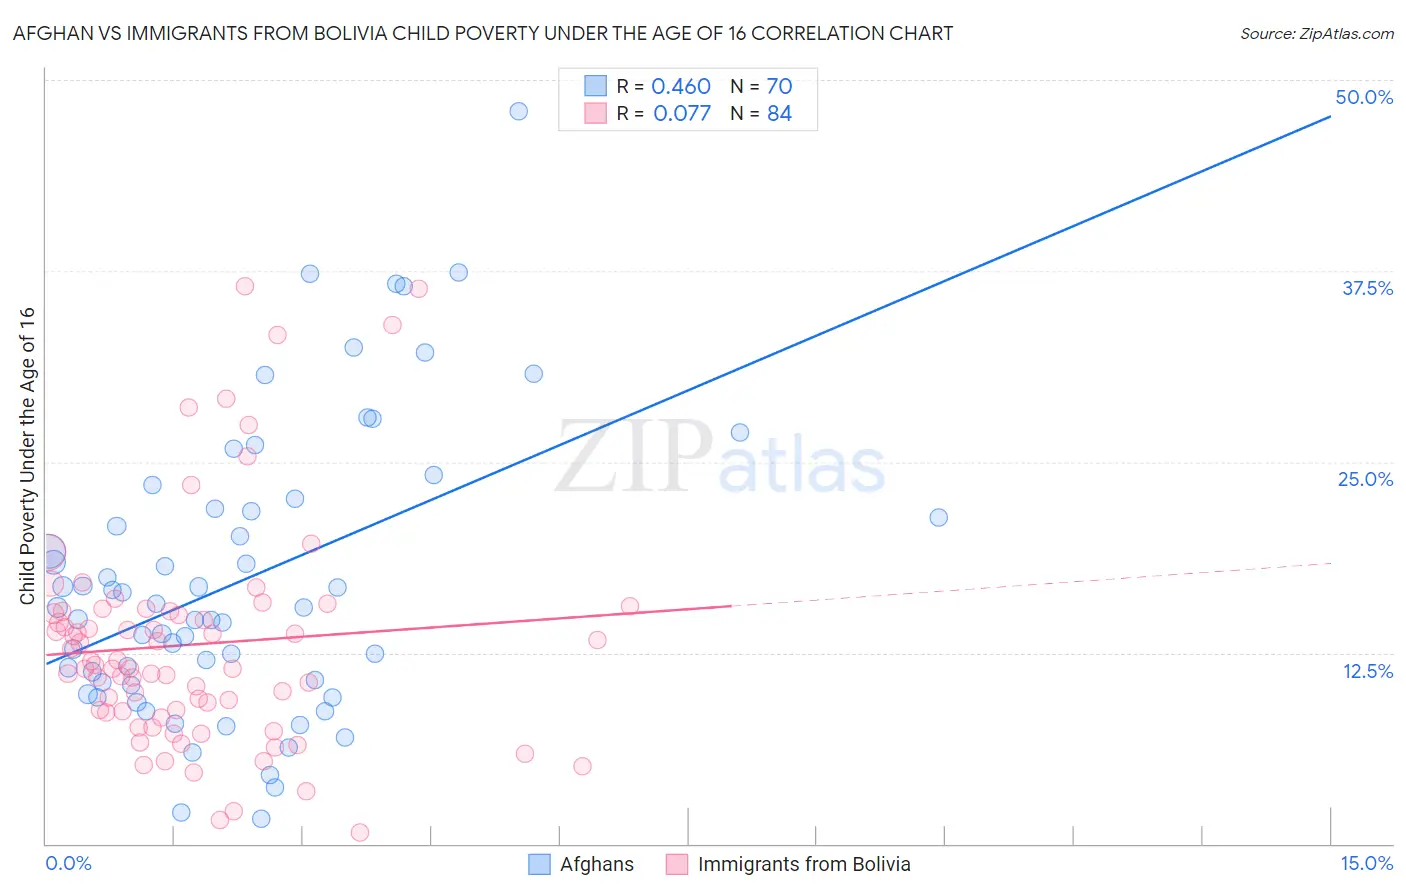 Afghan vs Immigrants from Bolivia Child Poverty Under the Age of 16